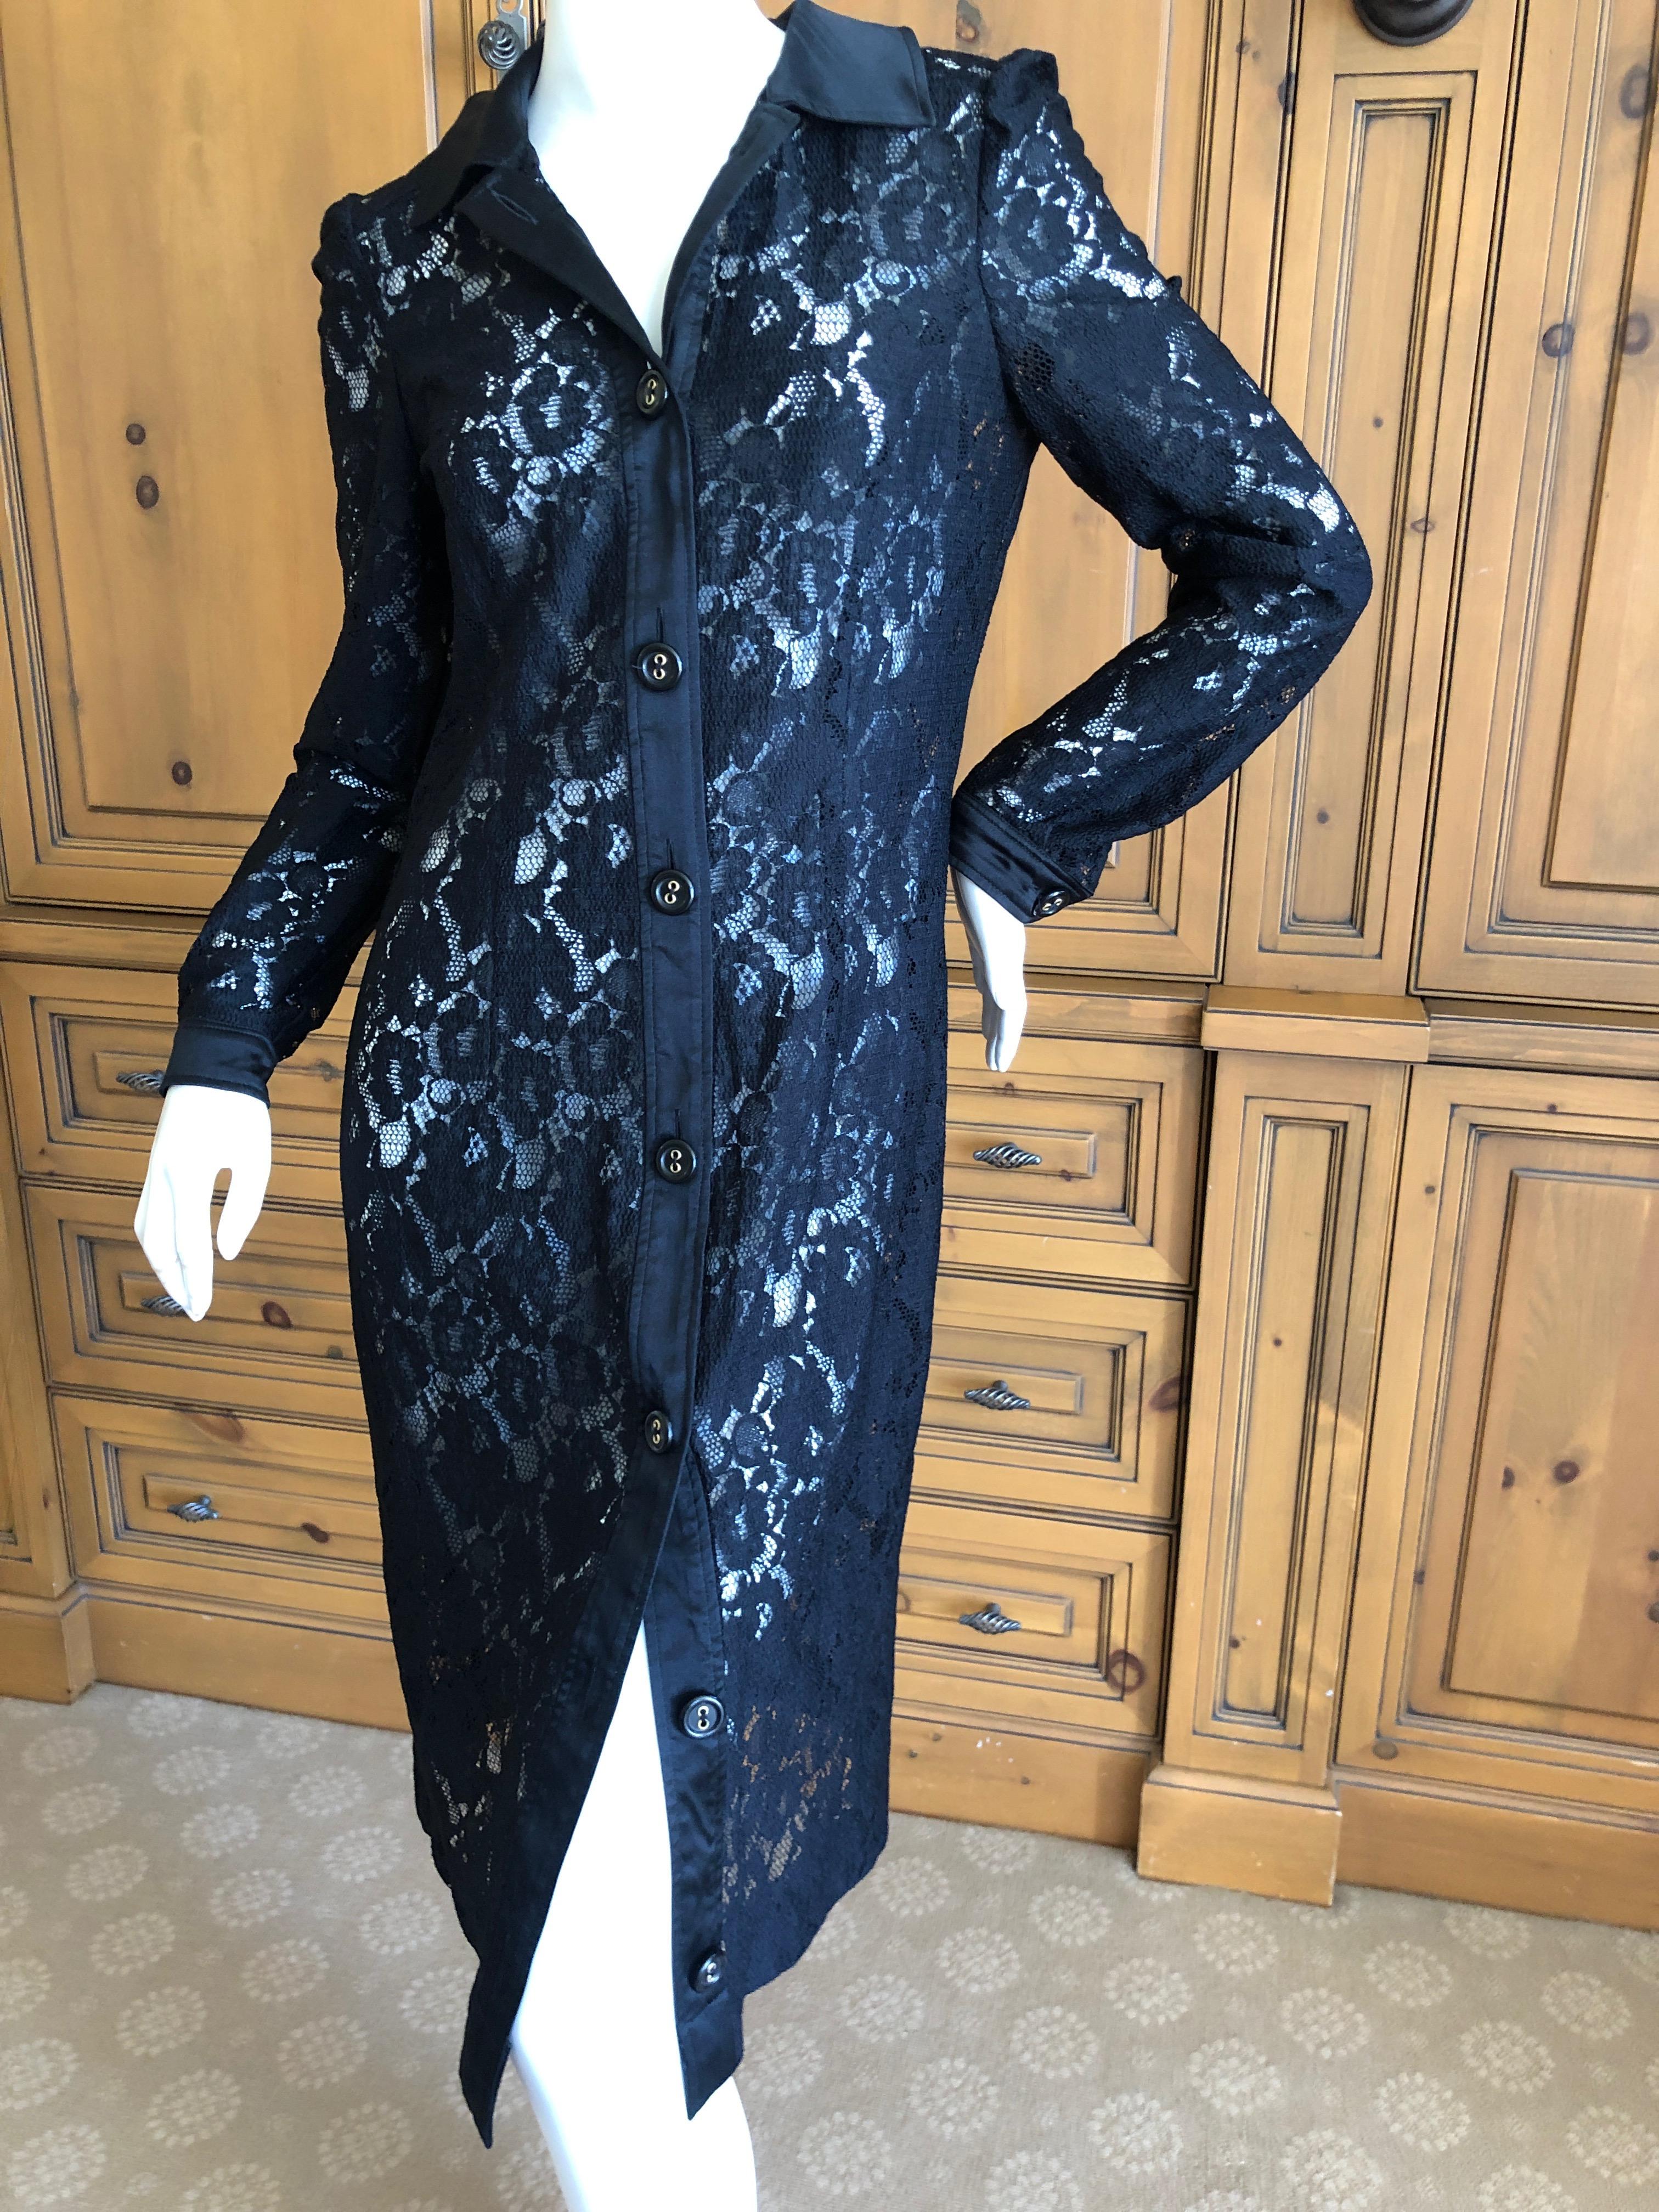 Dolce & Gabbana D&G Vintage Sheer Lace Shirt Dress New with Tags Size 46   In New Condition For Sale In Cloverdale, CA